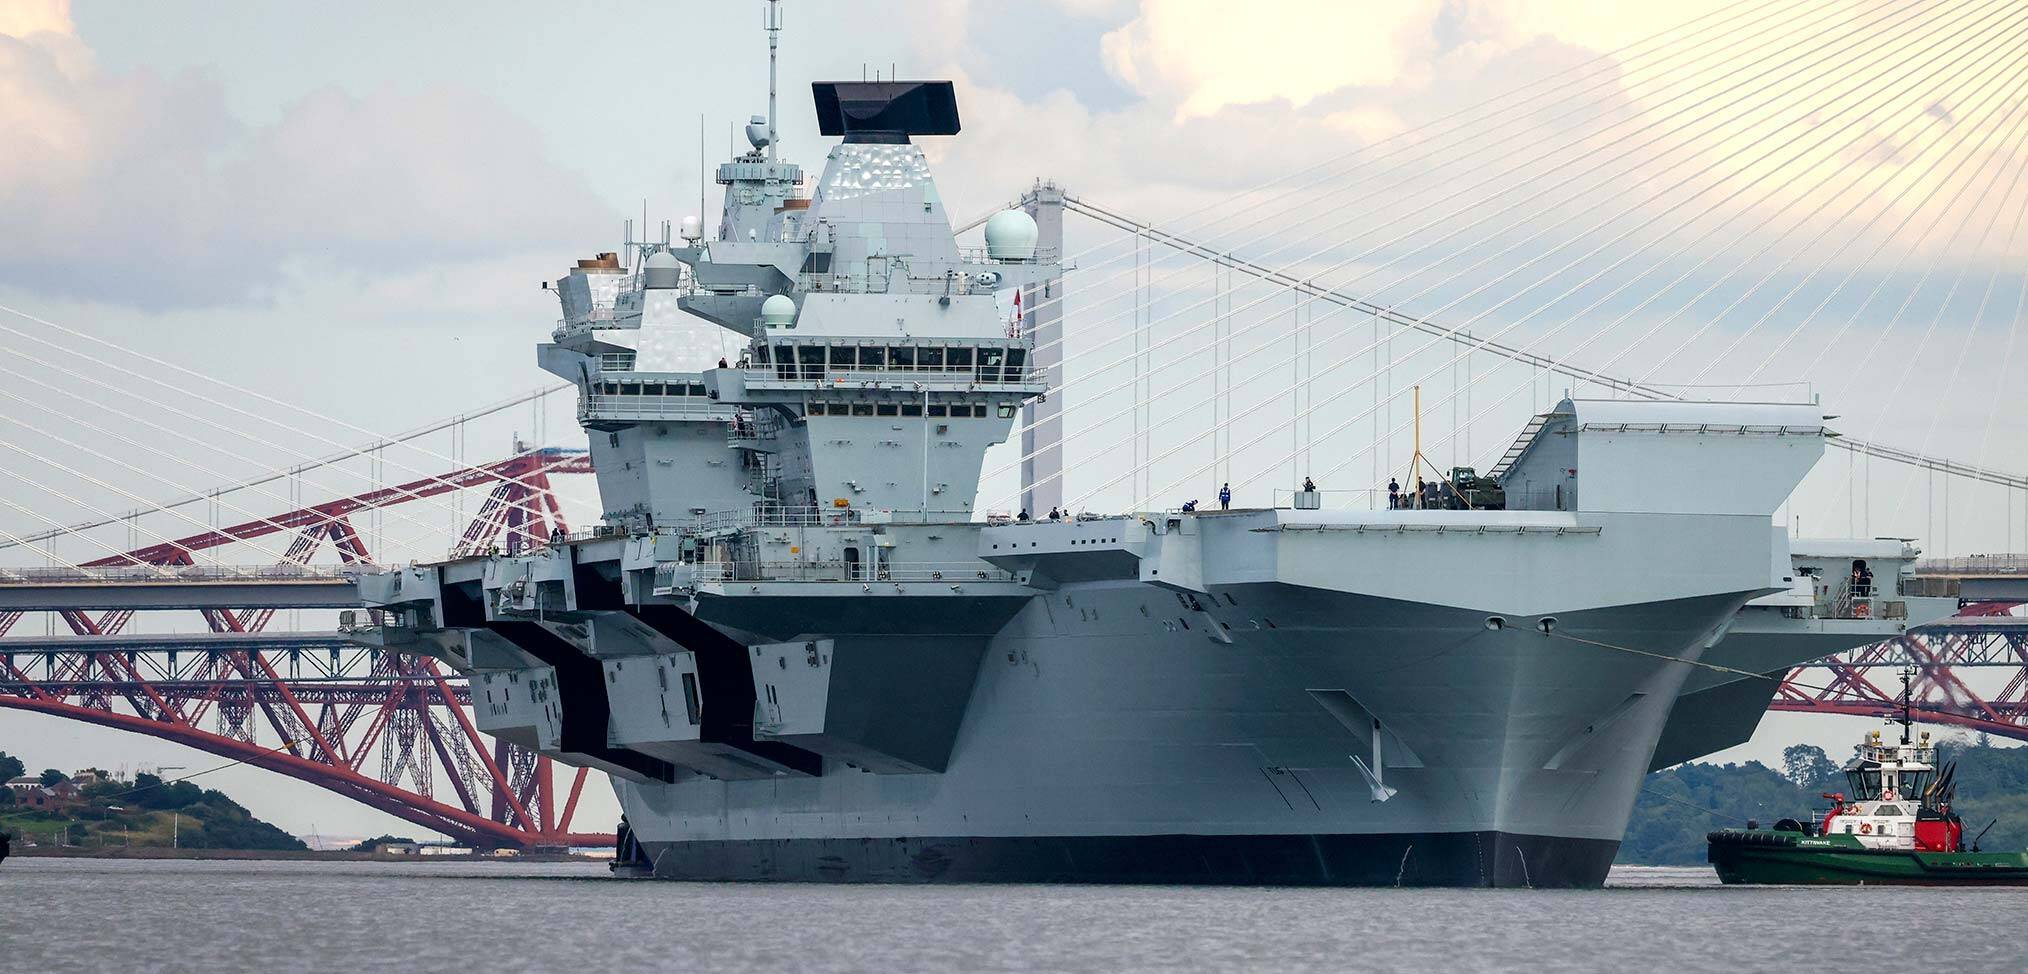 HMS Prince of Wales leaves dry dock as repairs are completed